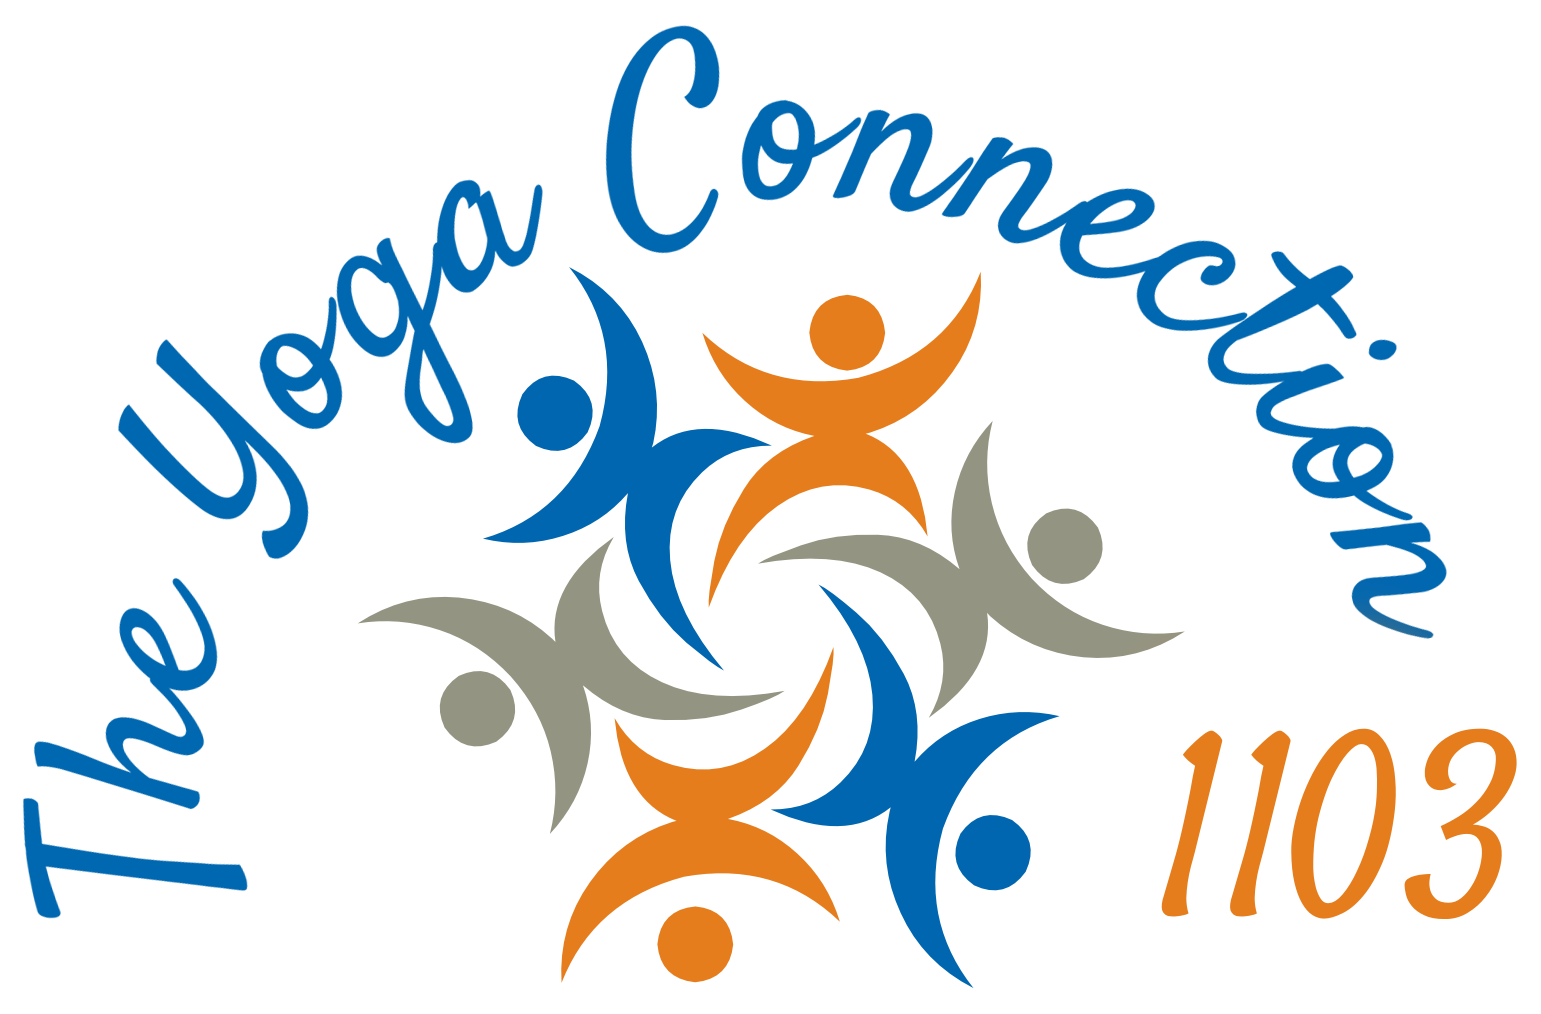 The Yoga Connection 1103 Offers Affordable Yoga Classes for All Ages & Abilities